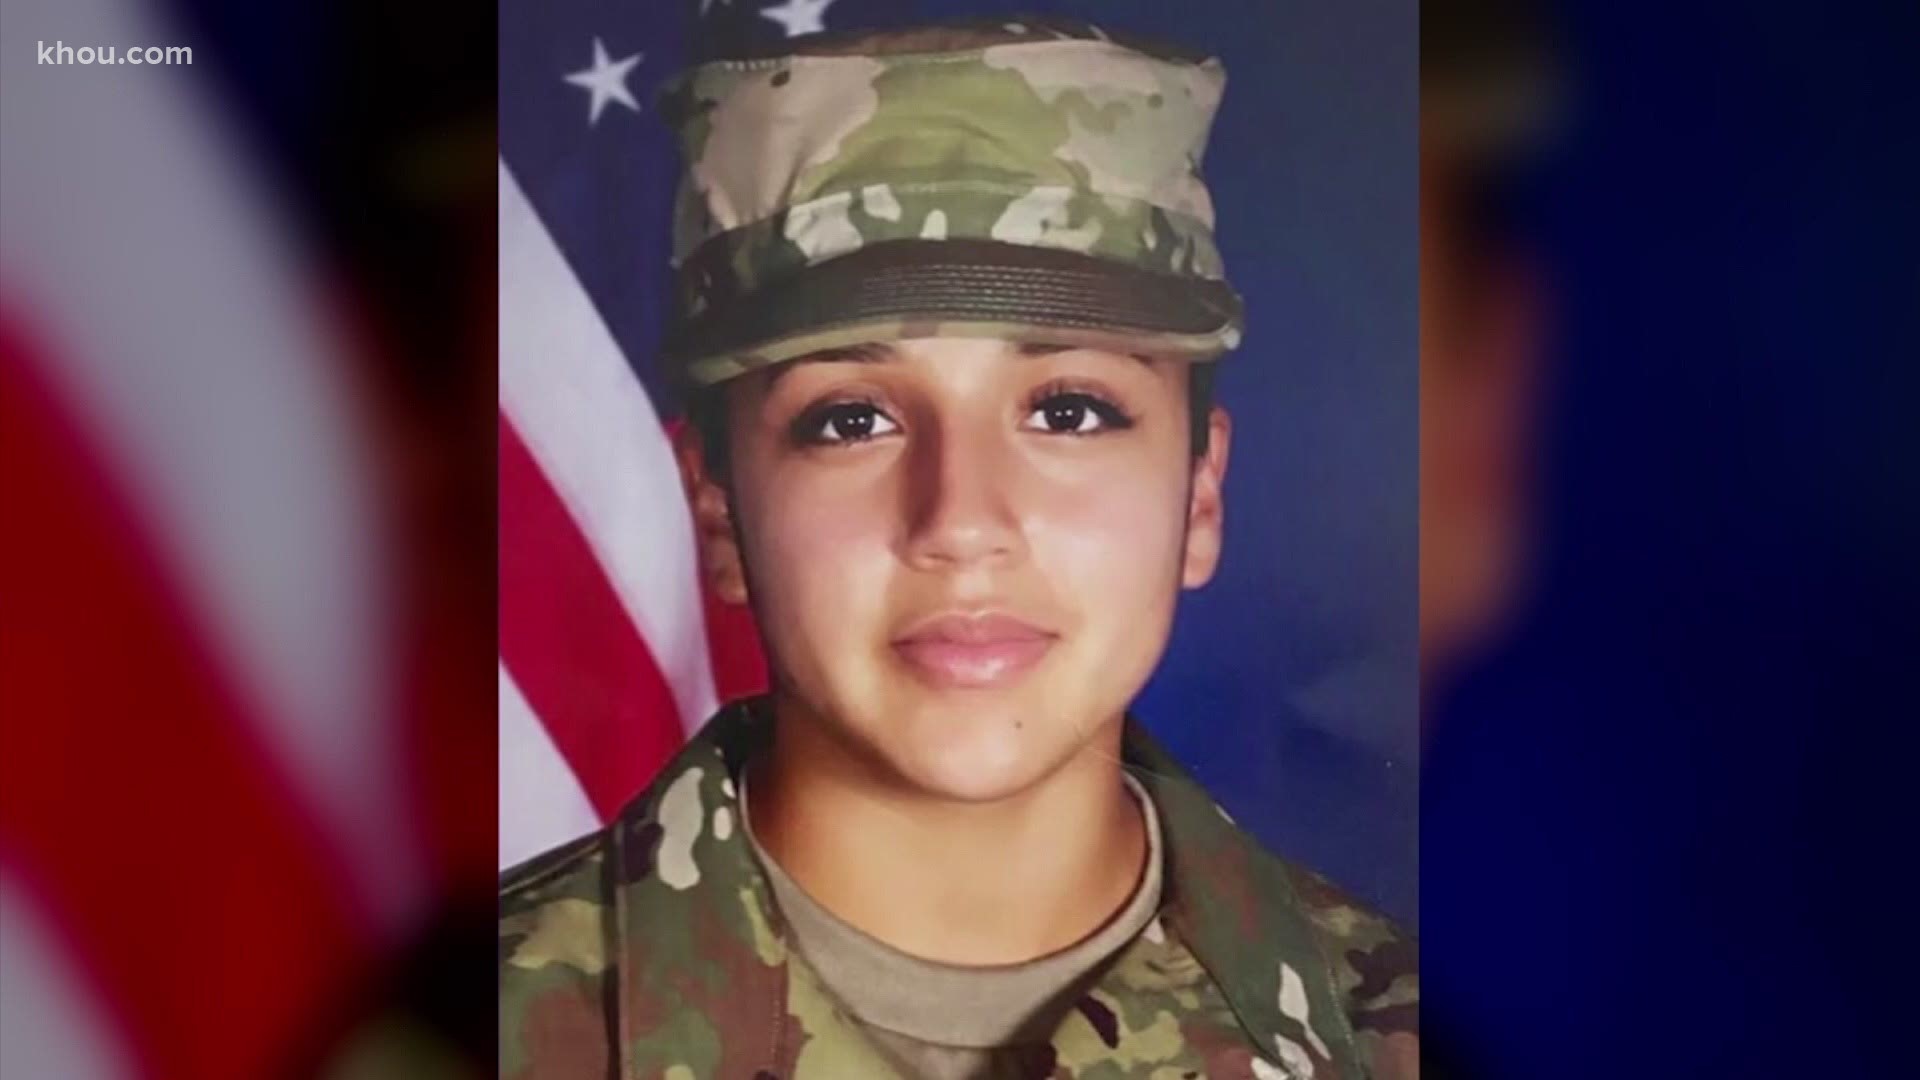 Vanessa Guillen's death has inspired a national movement that calls for awareness and change to sexual harassment in the military